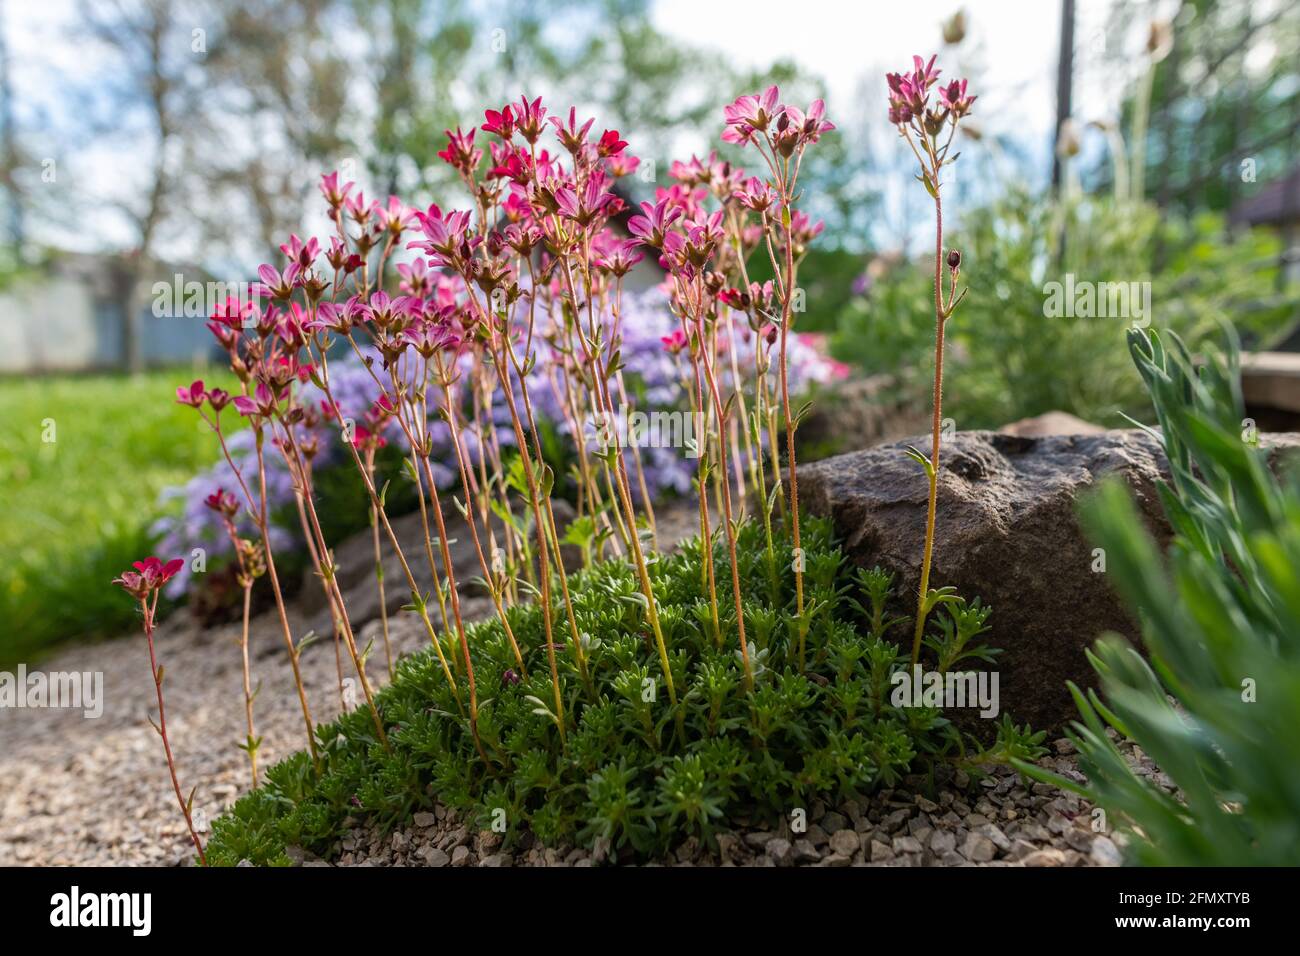 Saxifraga arendsii. Blooming saxifraga in rock garden. Rockery with small pretty pink flowers, nature background. Stock Photo